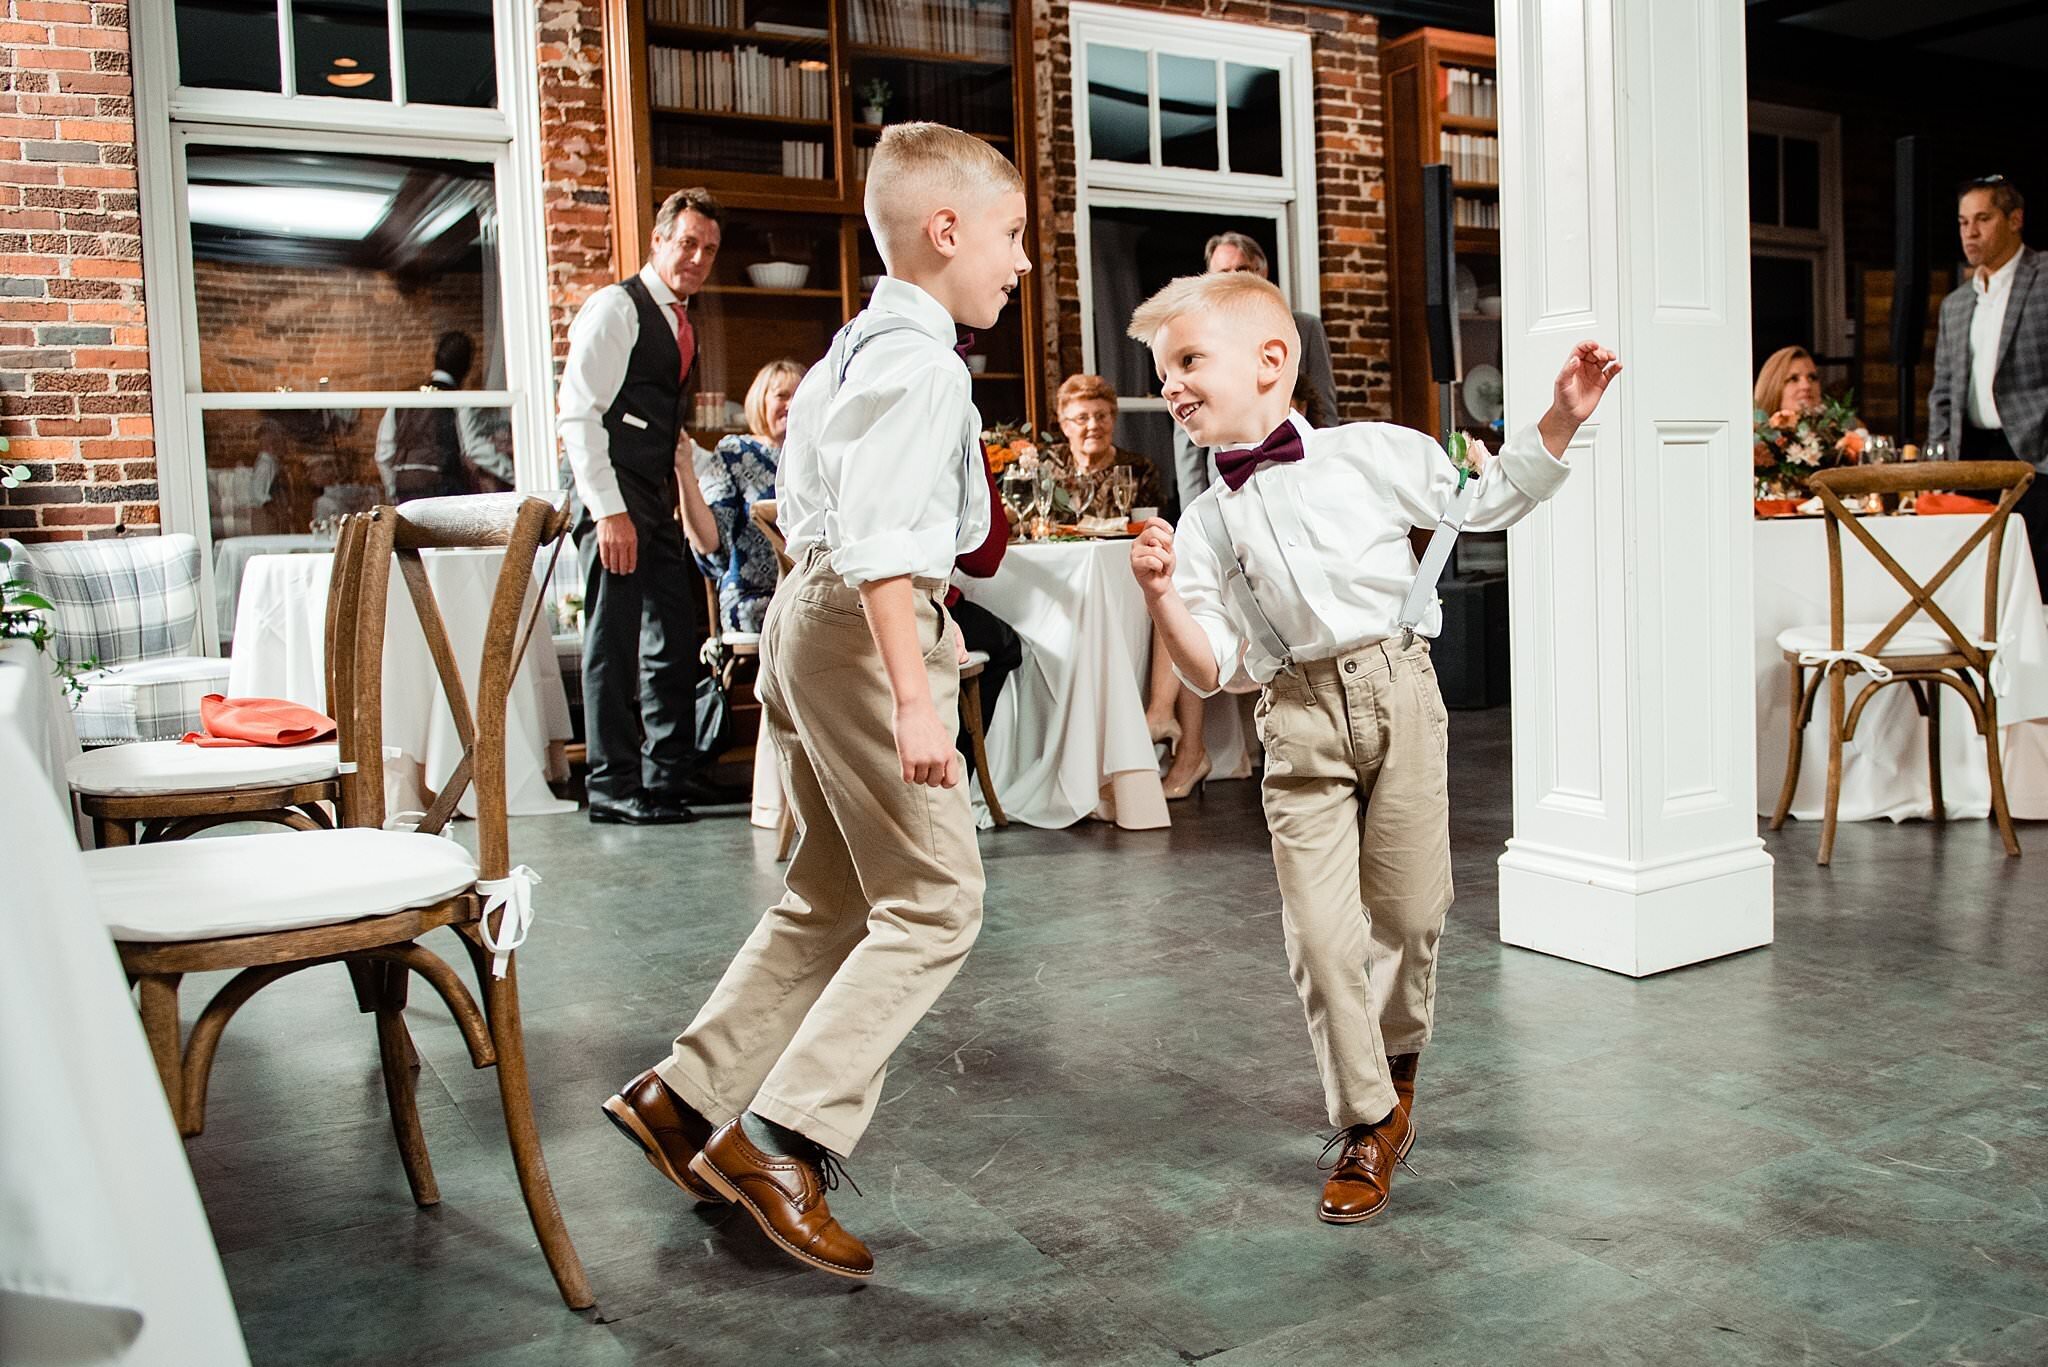 Ring bearers wearing suspenders and bow ties dancing in circles together on the dance floor at the event space at Tasty Table